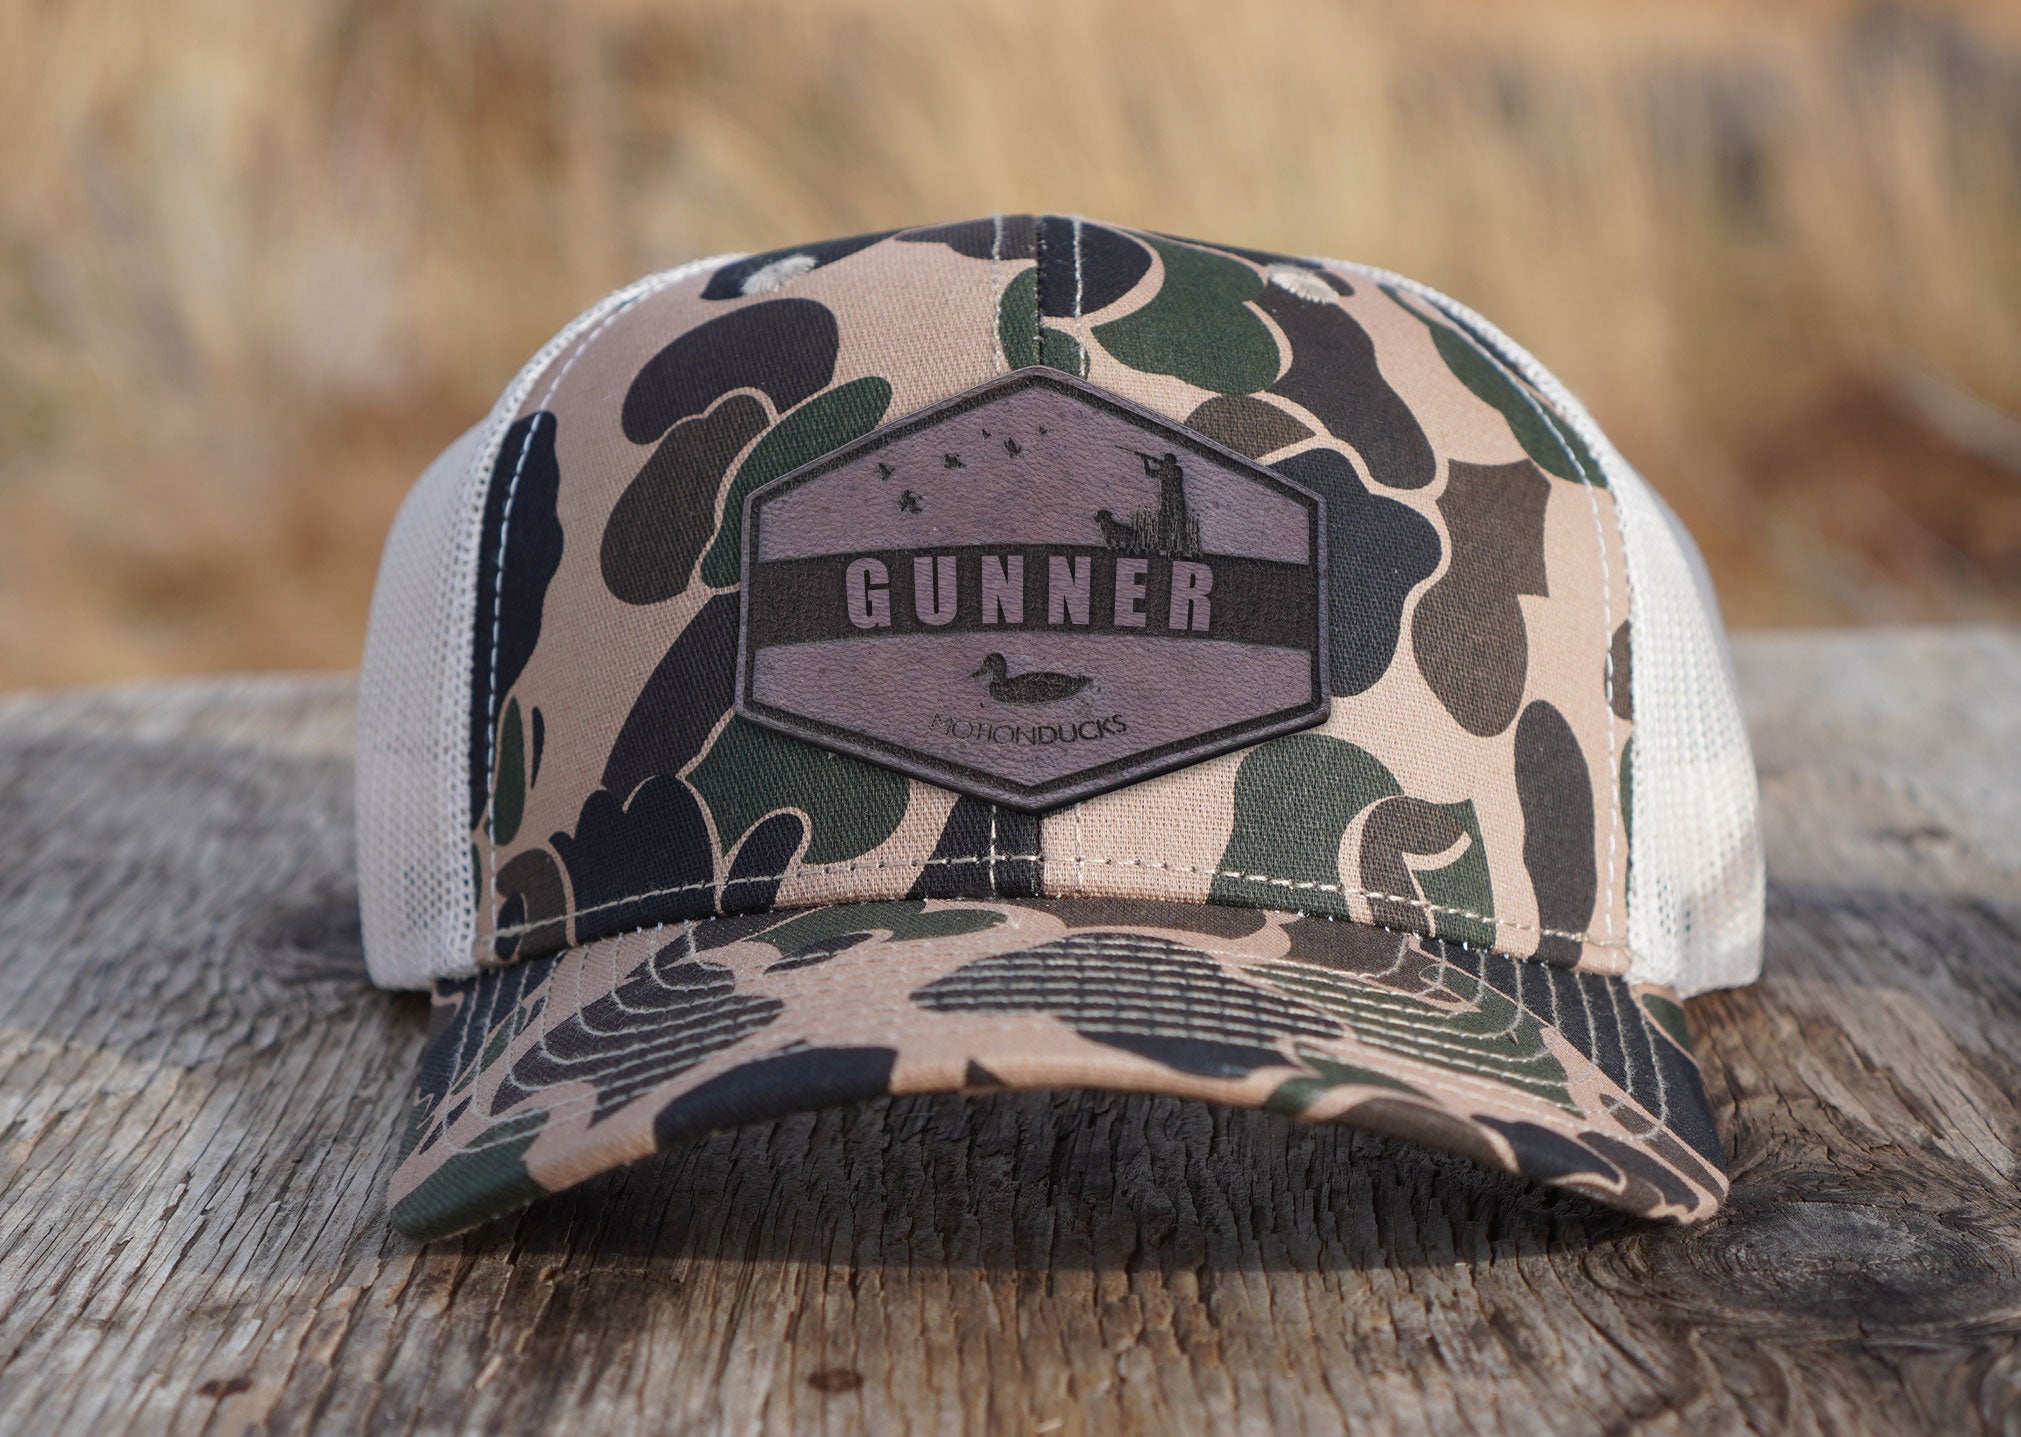 Glow In The Dark Dope Camo Patched Hat